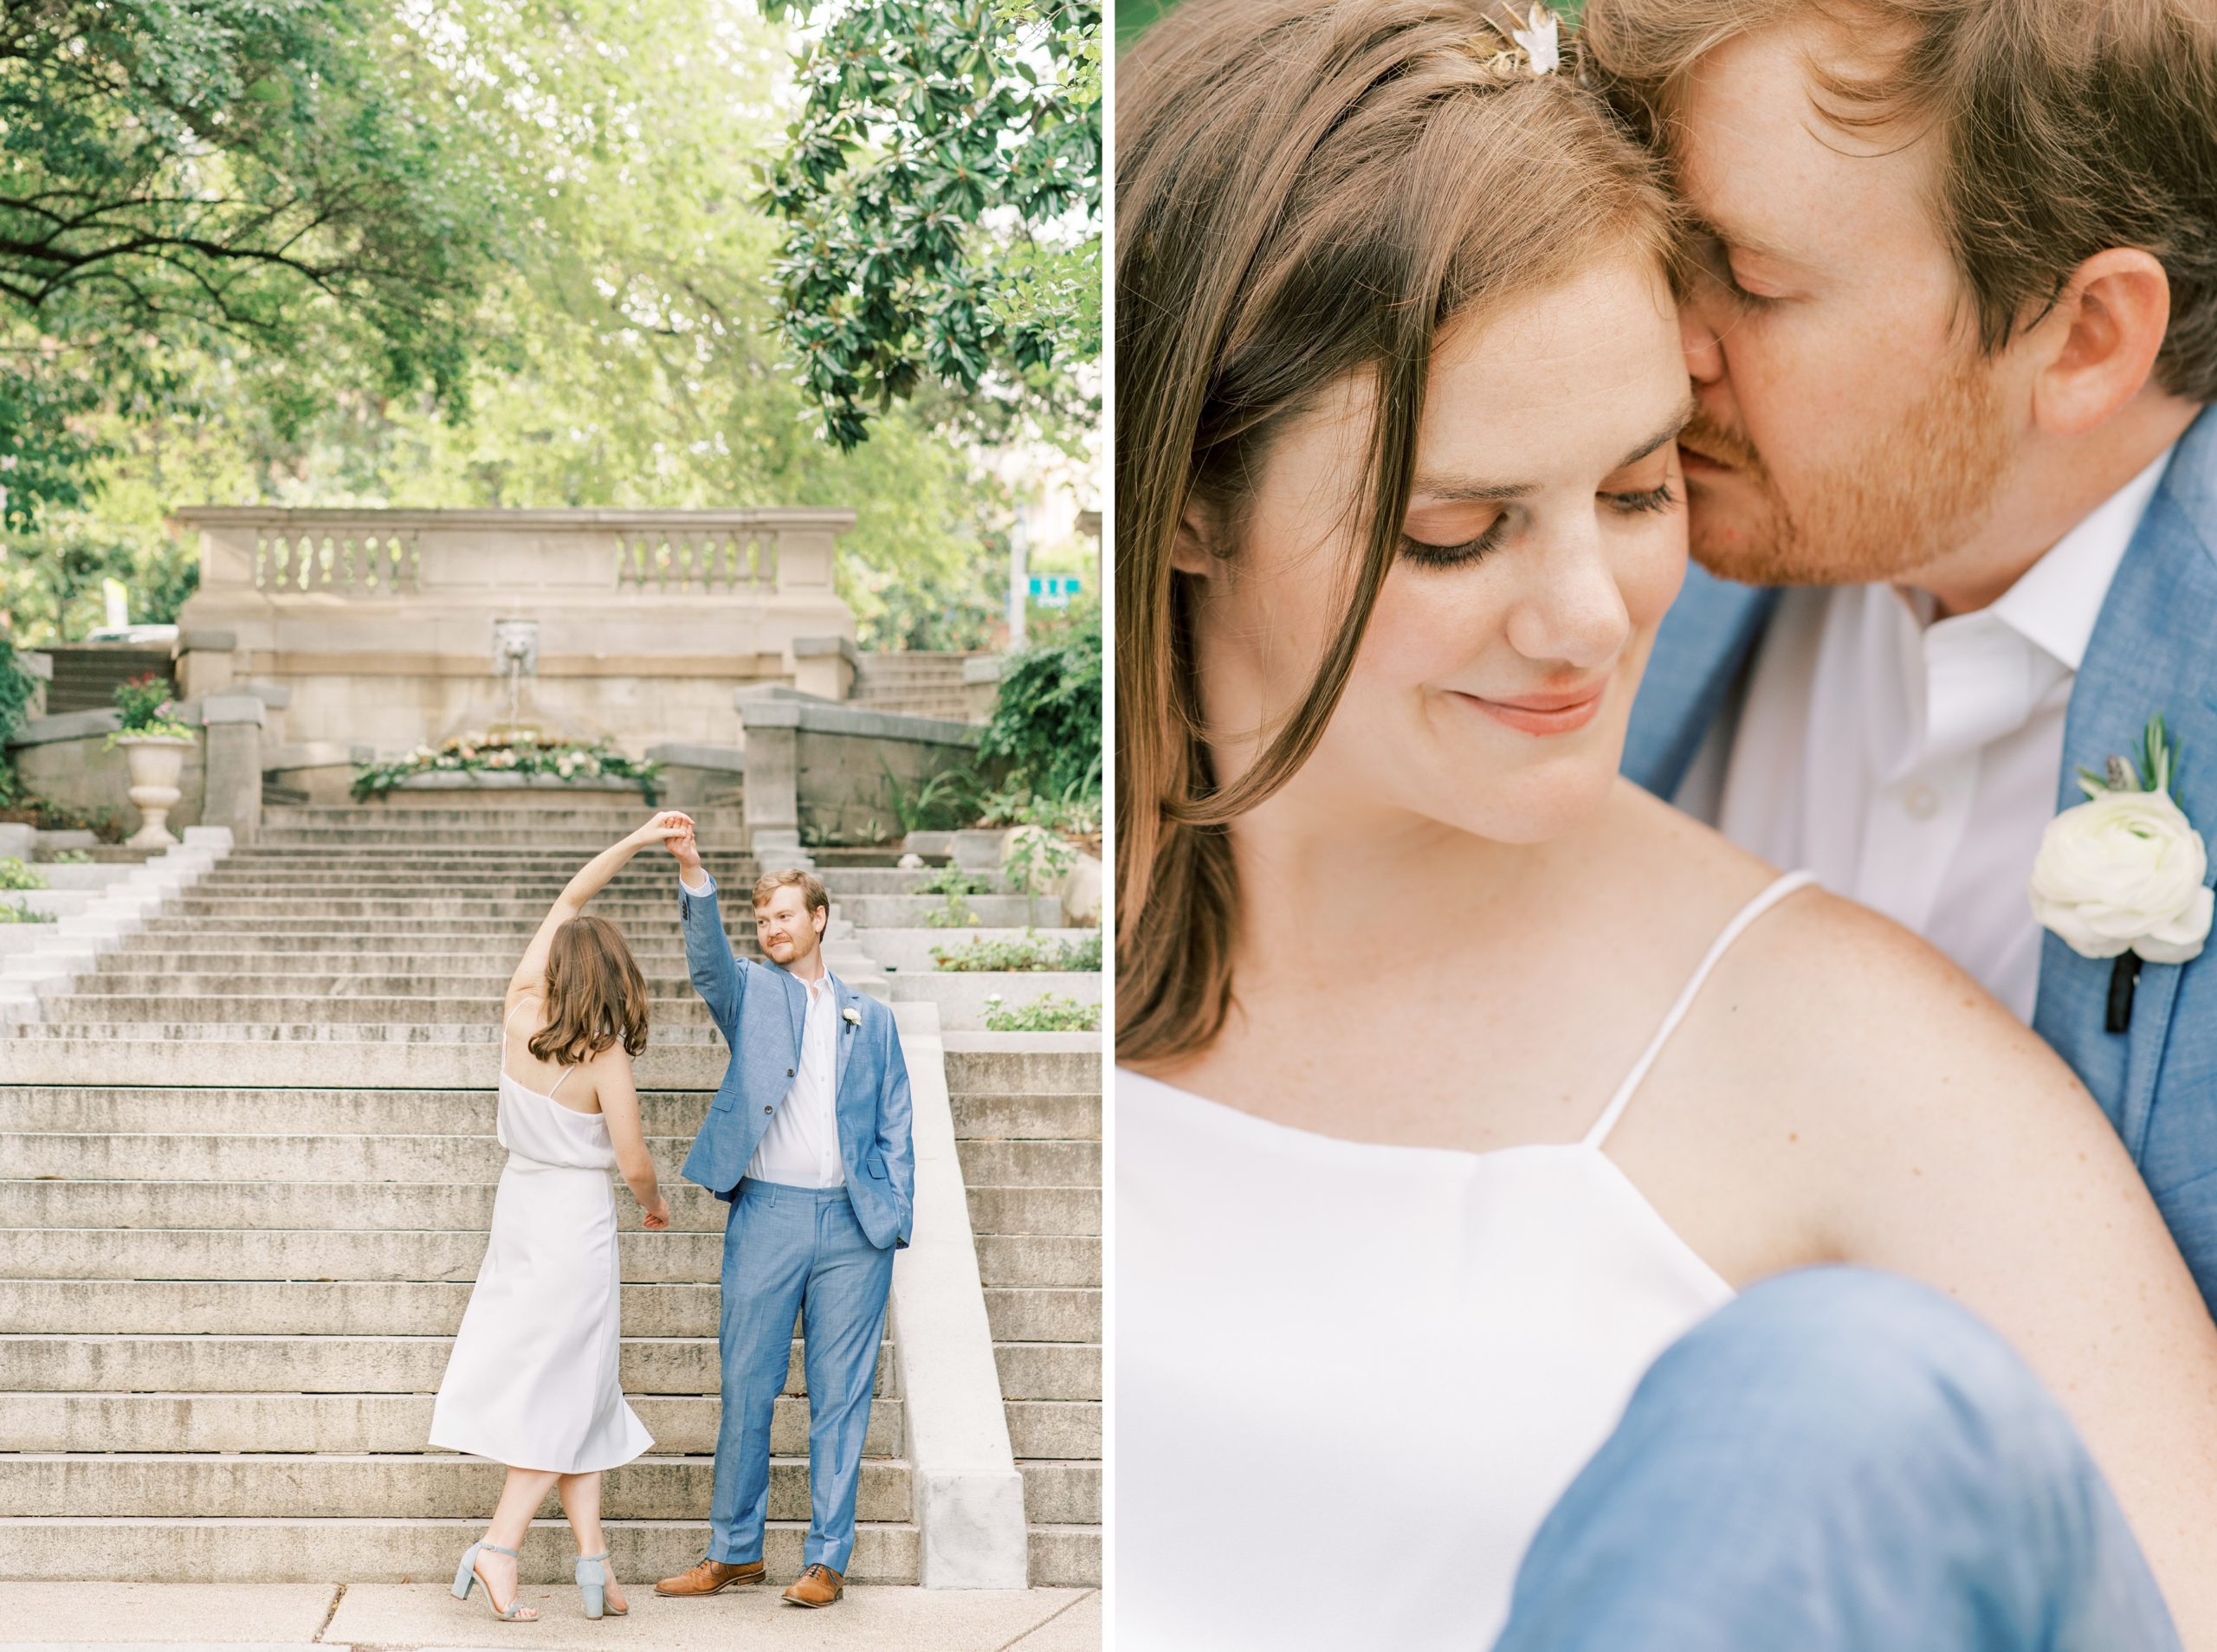 An intimate elopement wedding at the Spanish Steps in the Kalorama neighborhood of Washington, DC; complete with a newlywed picnic!